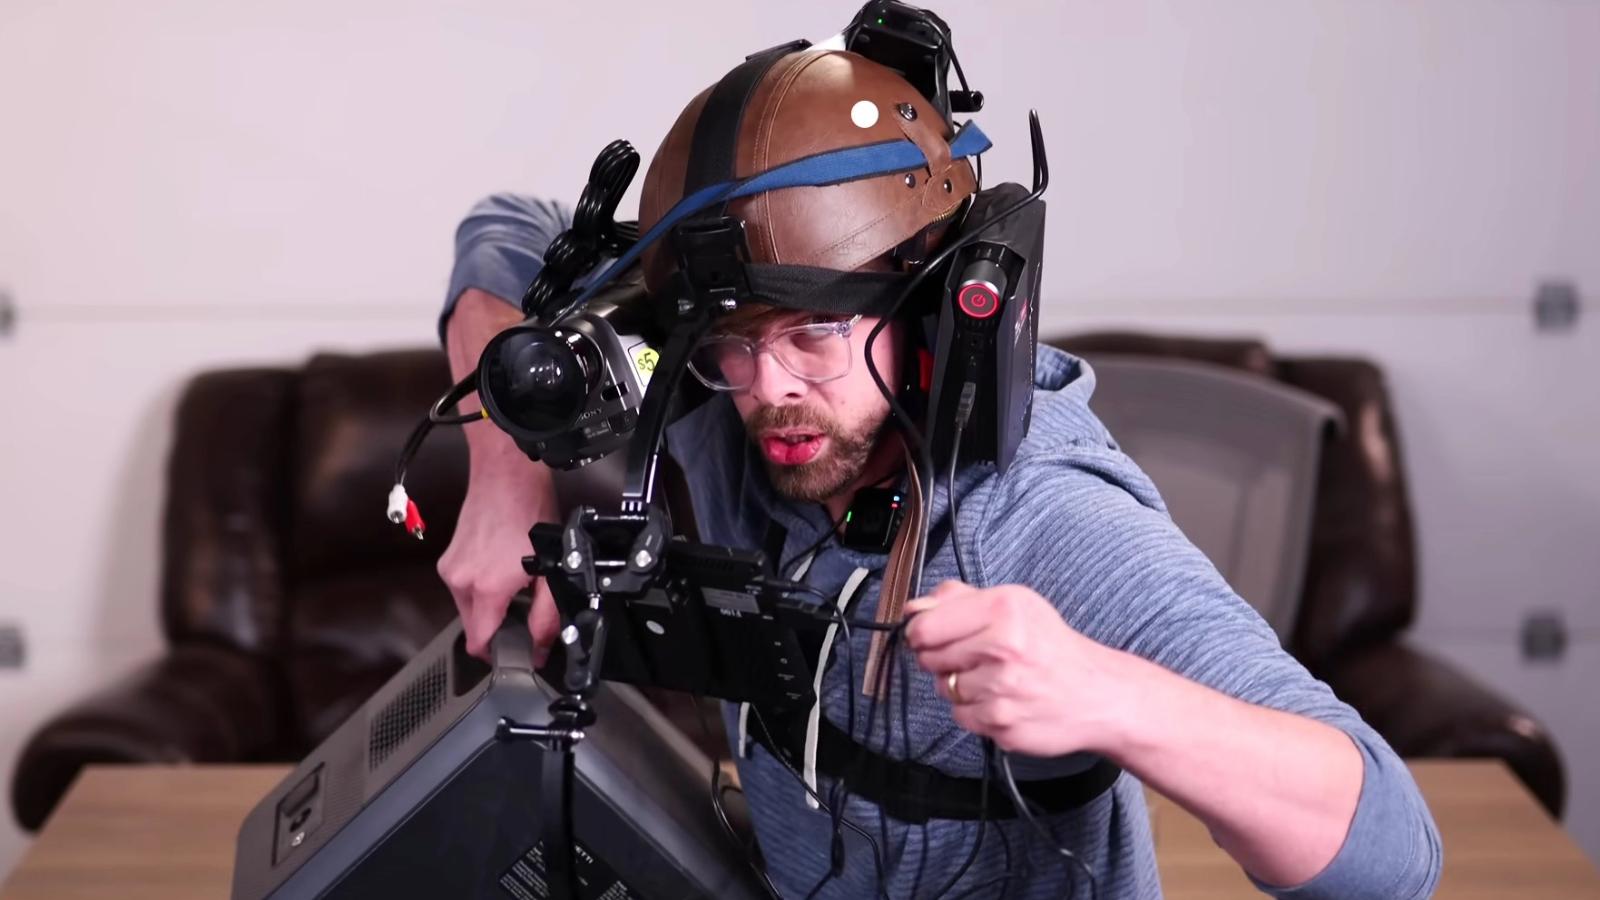 YouTuber Basically Homeless with their makeshift Vision Pro setup